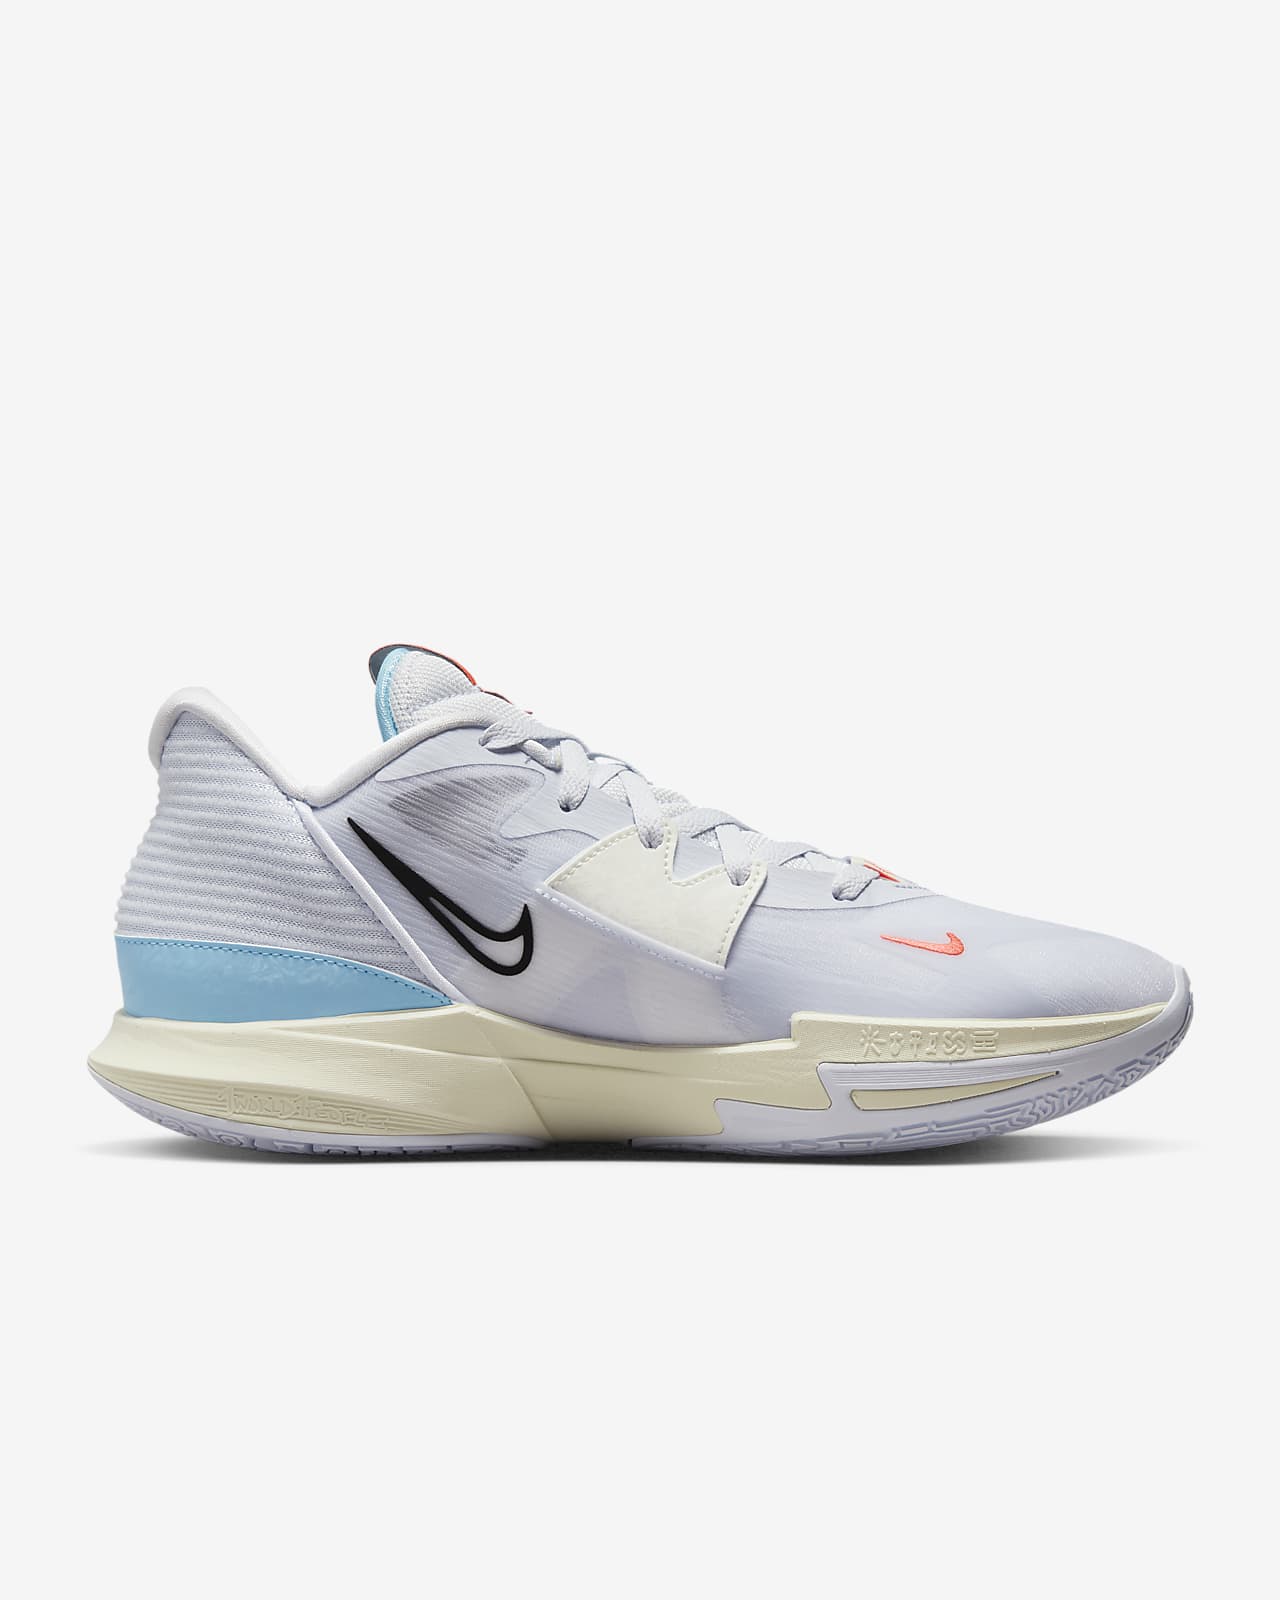 Kyrie Low 5 EP Basketball Shoes